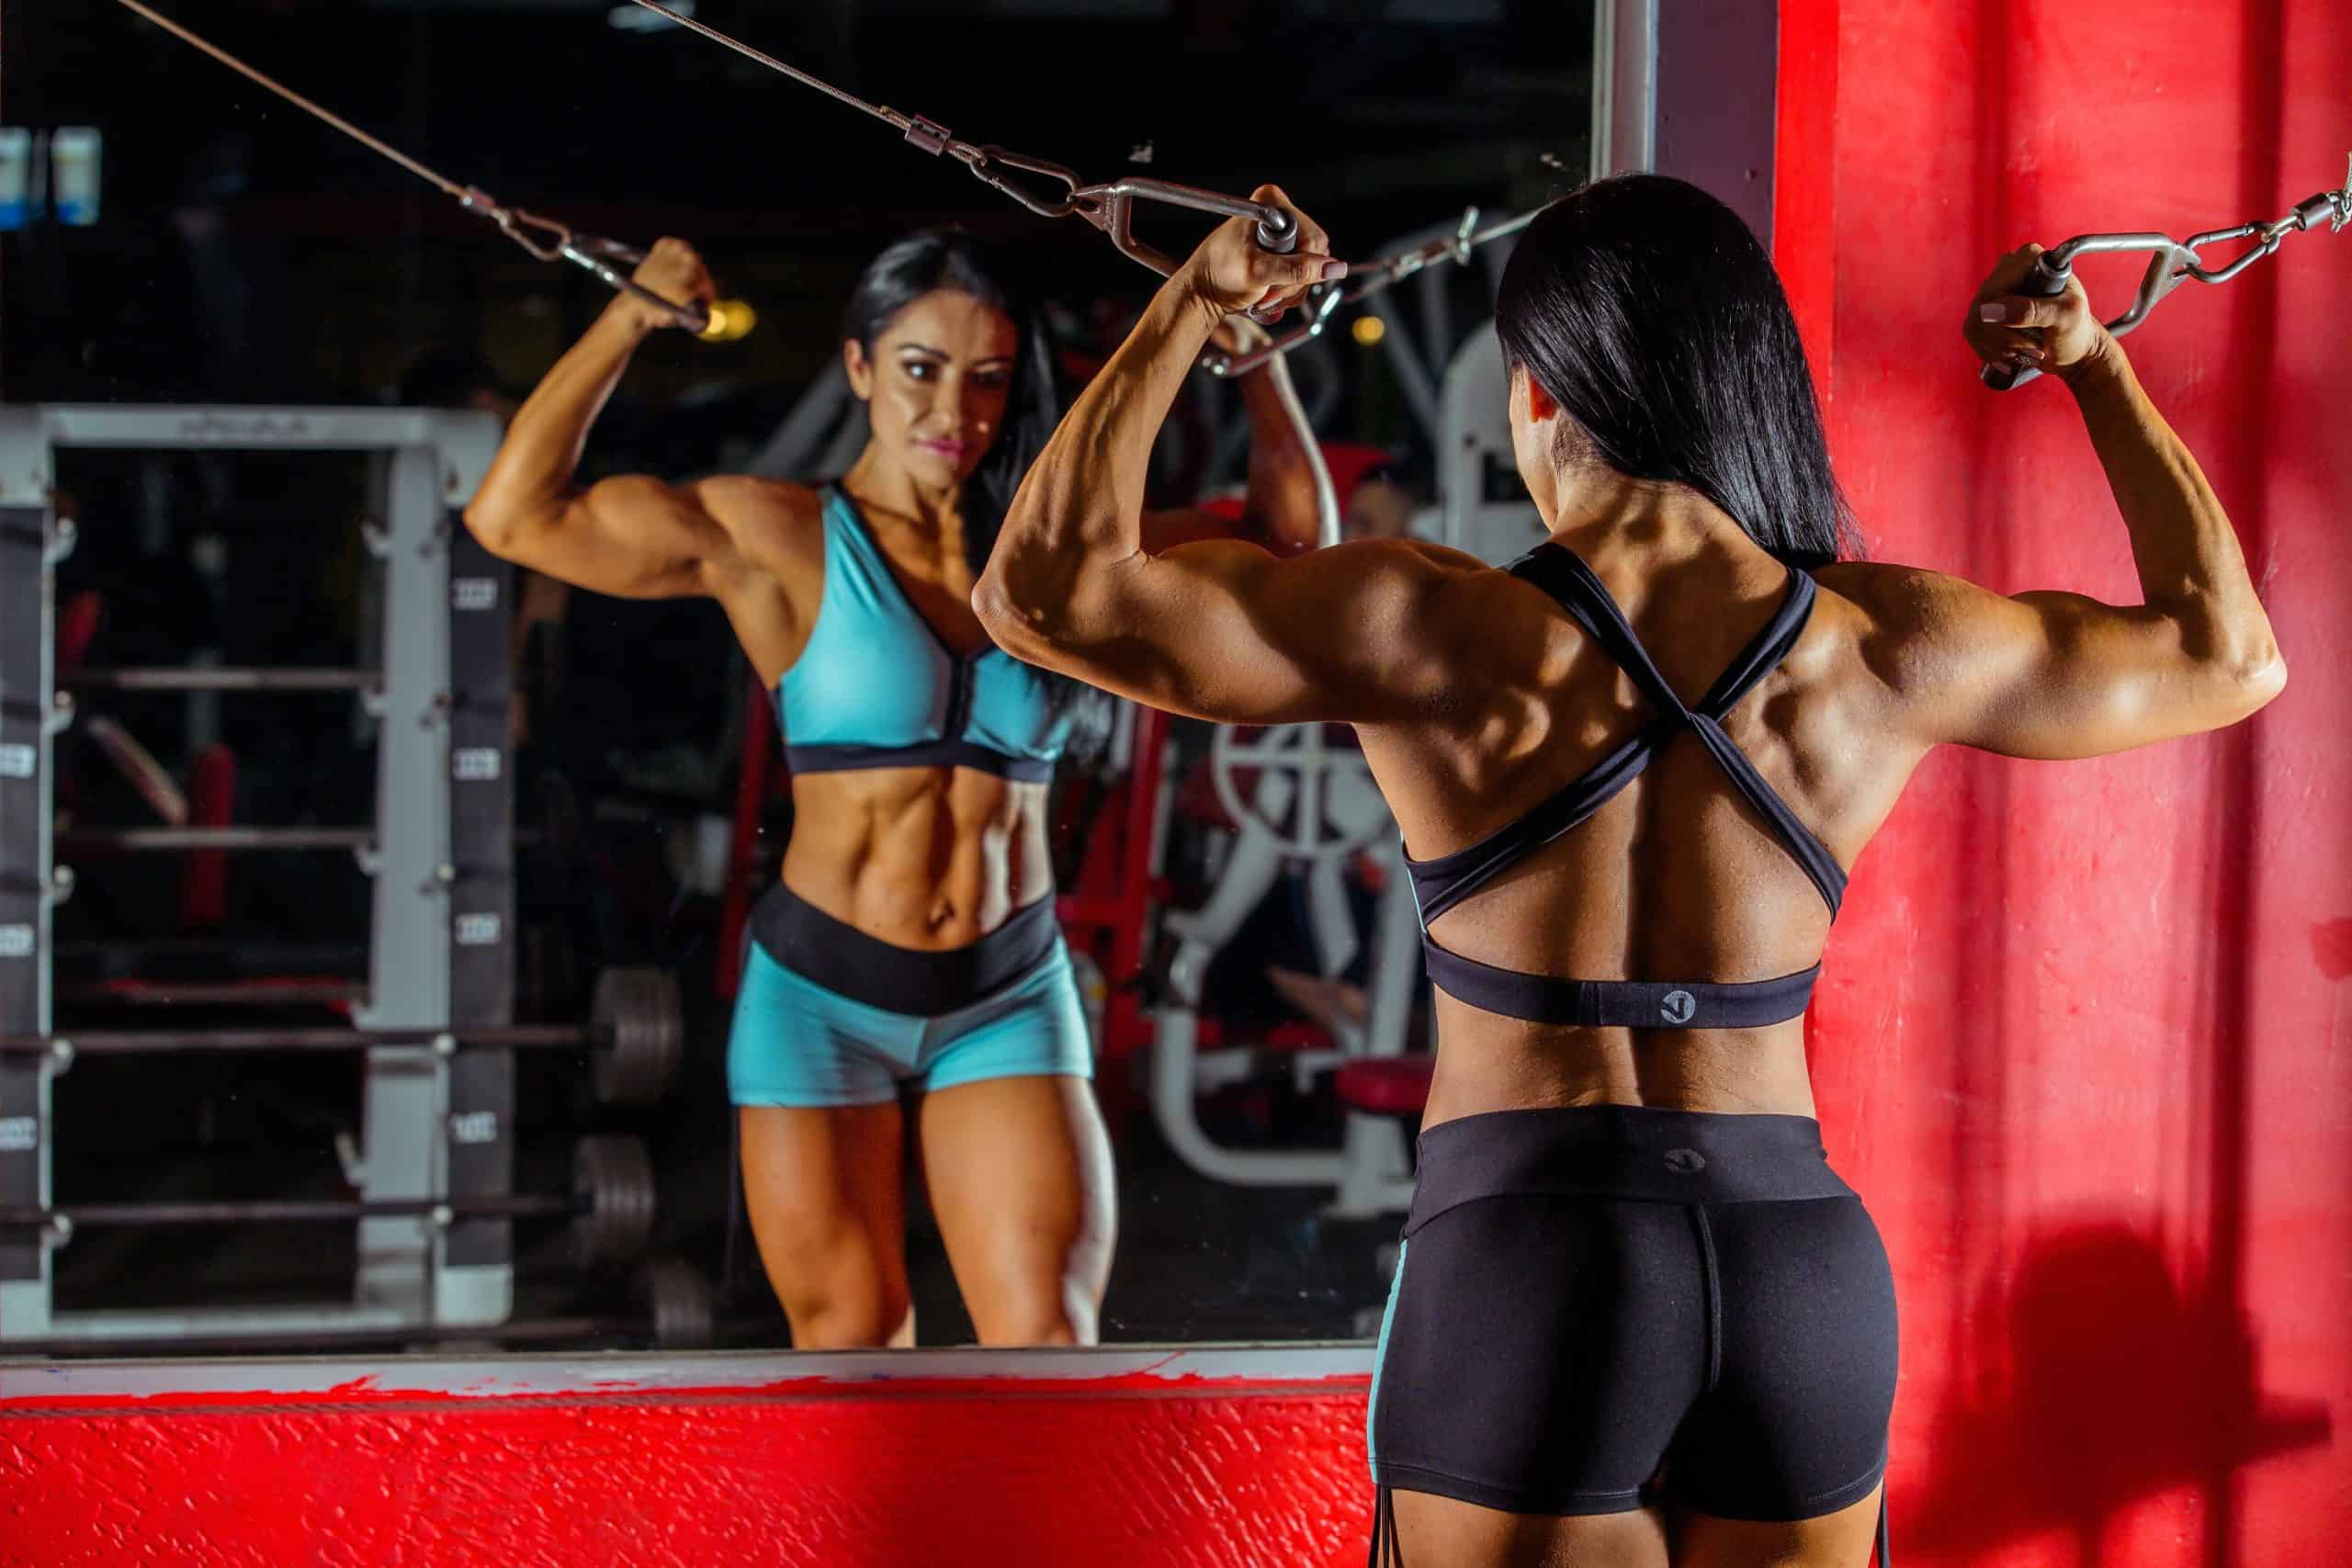 Tips for becoming a fitness model